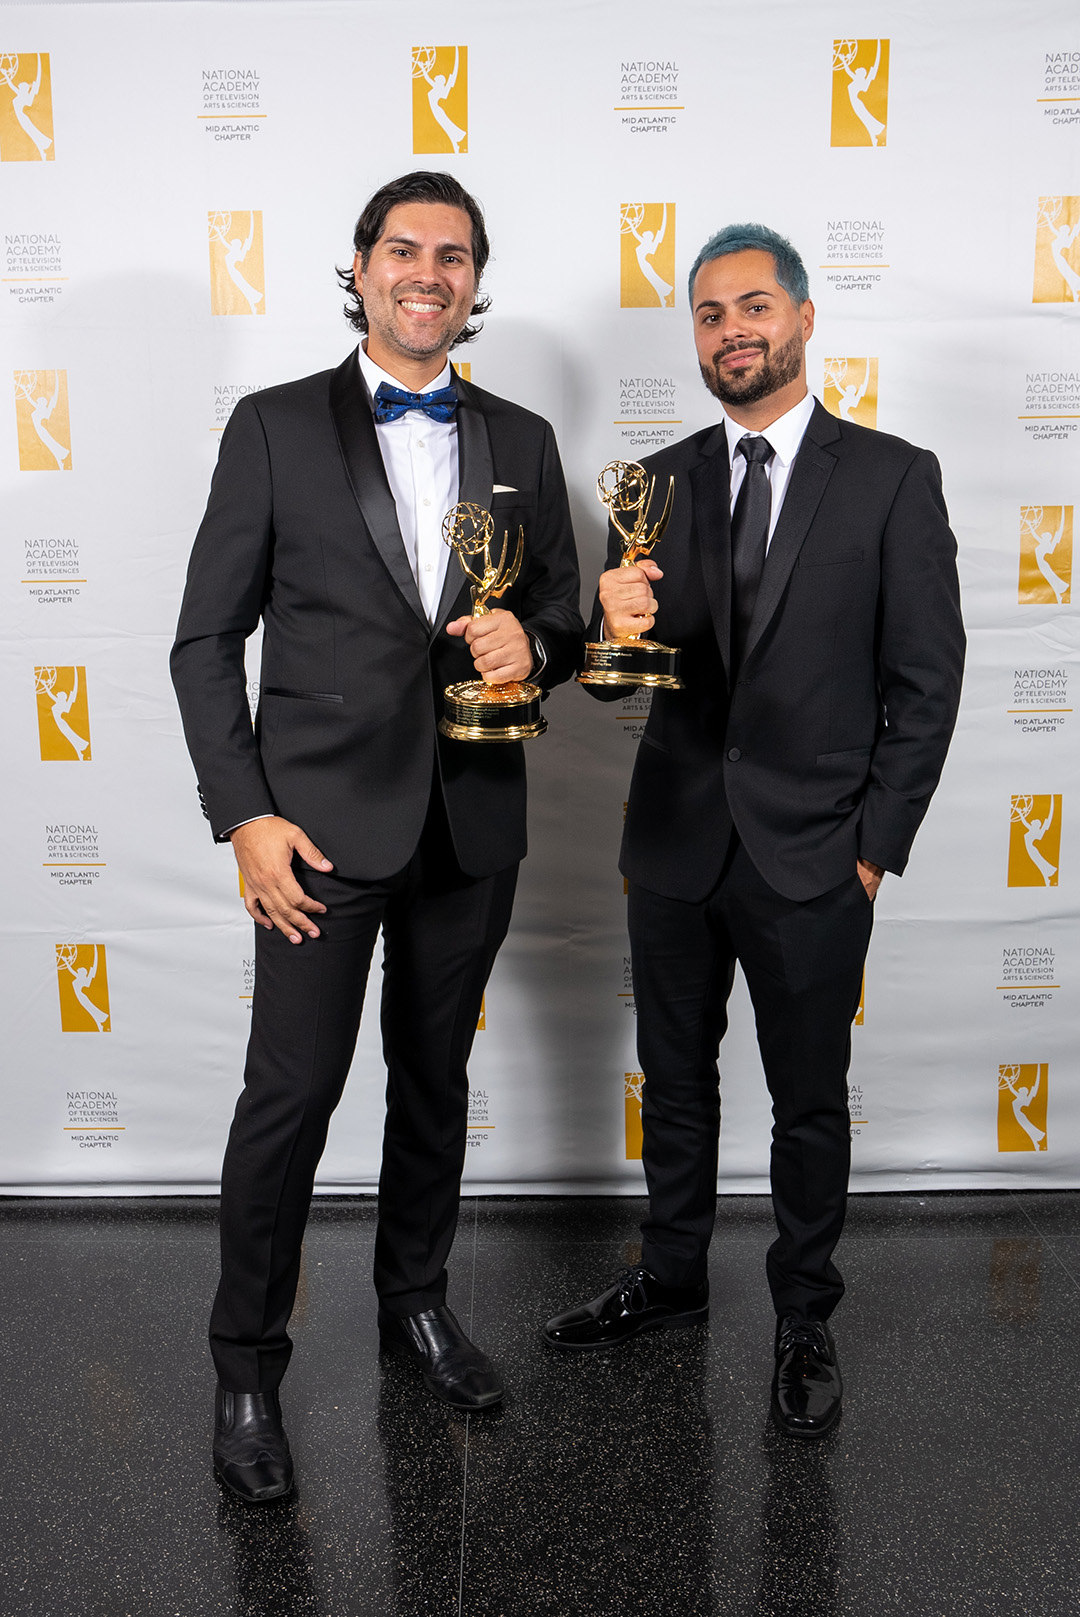 Director Yuri and Producer Igor with Emmy Statuettes